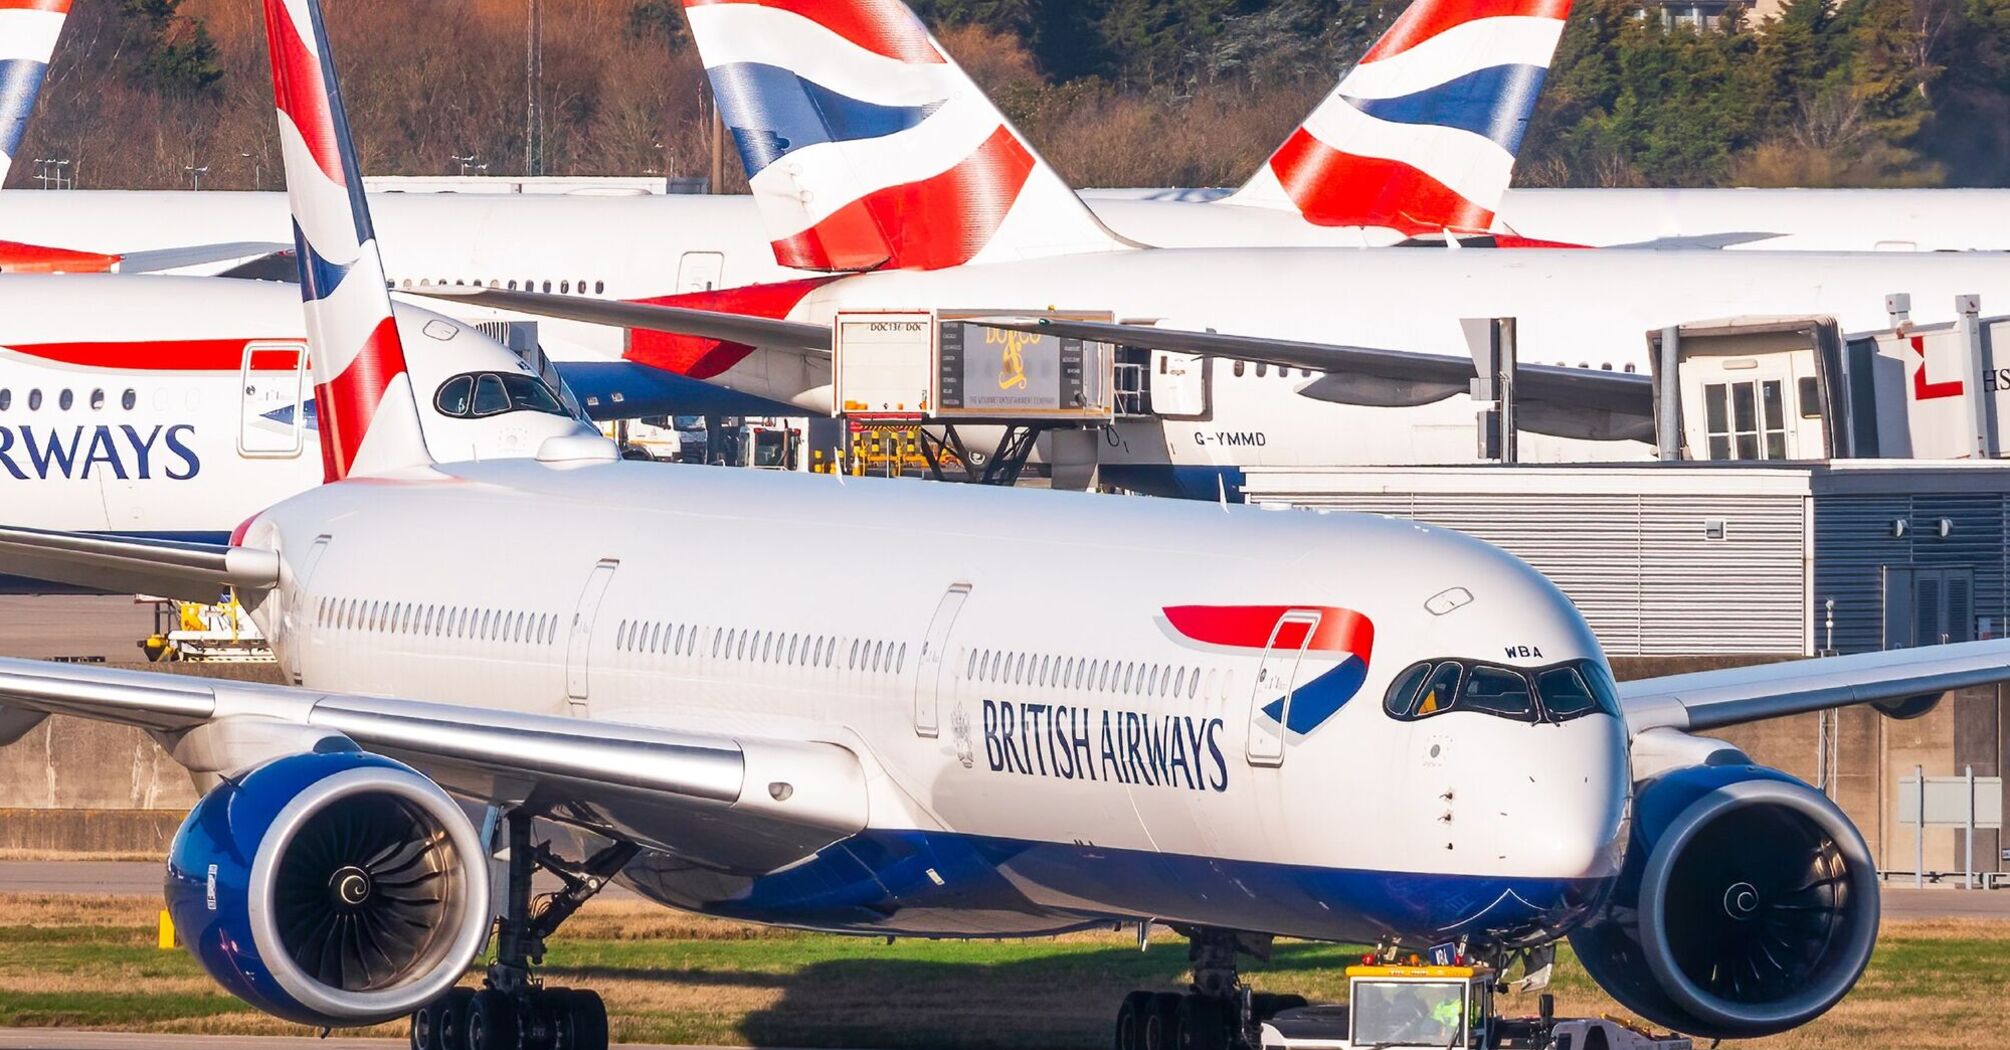 British Airways is preparing for a historic breakthrough after the pandemic: forecast